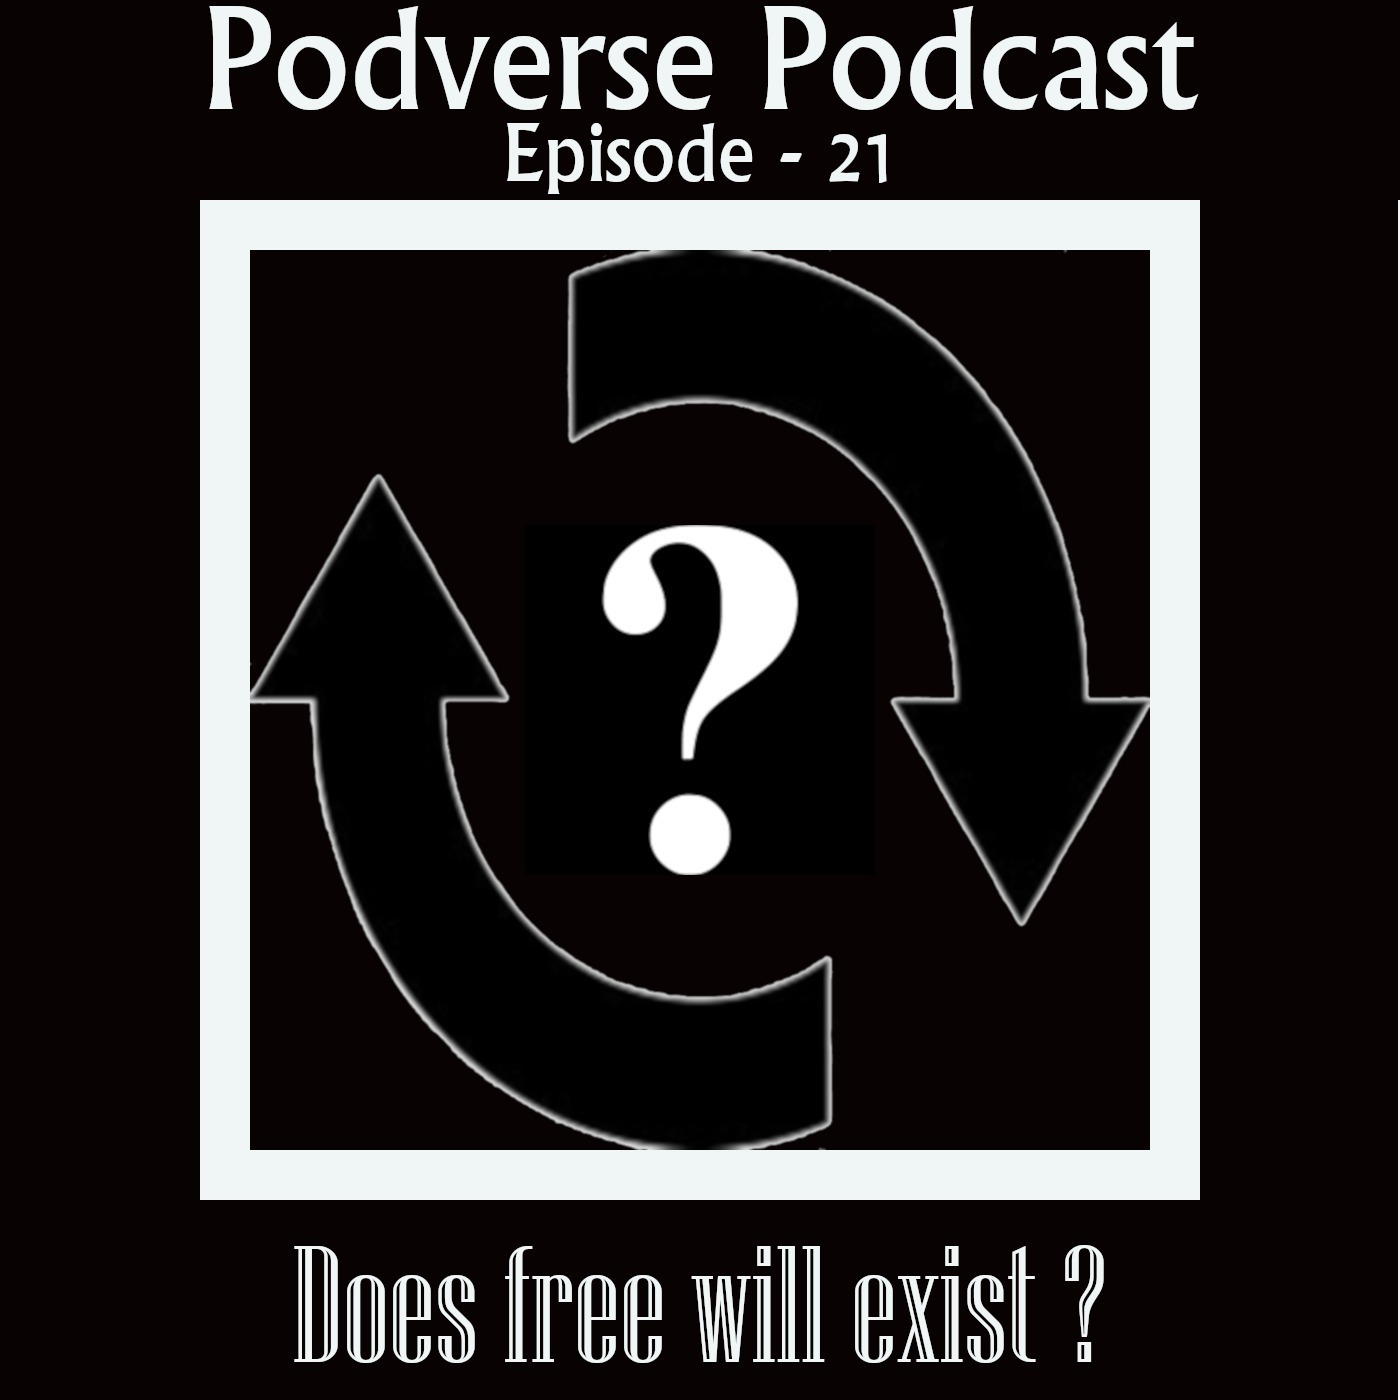 Does free will exist? - Episode 21